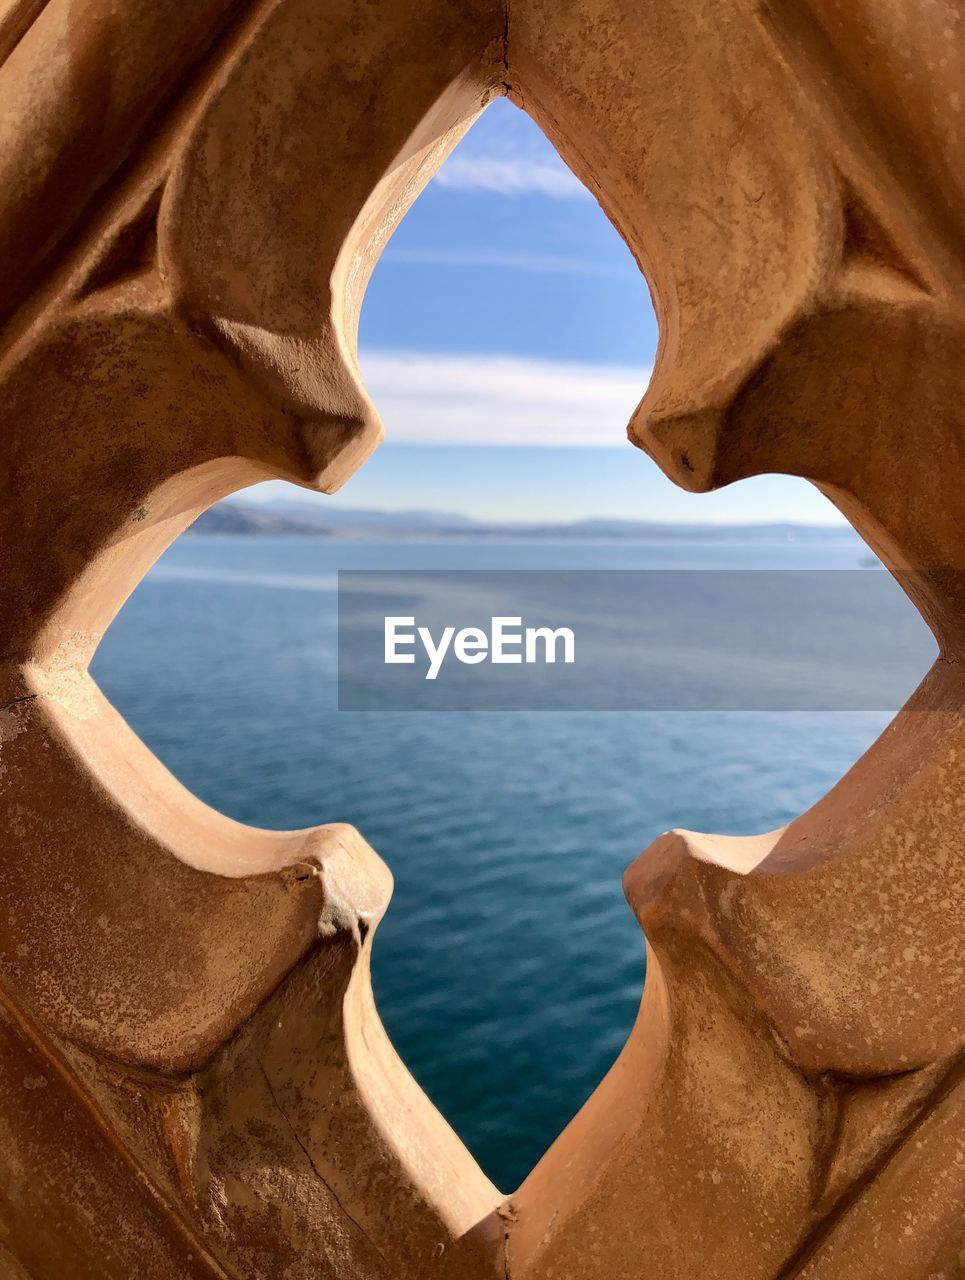 The sea from a different eye